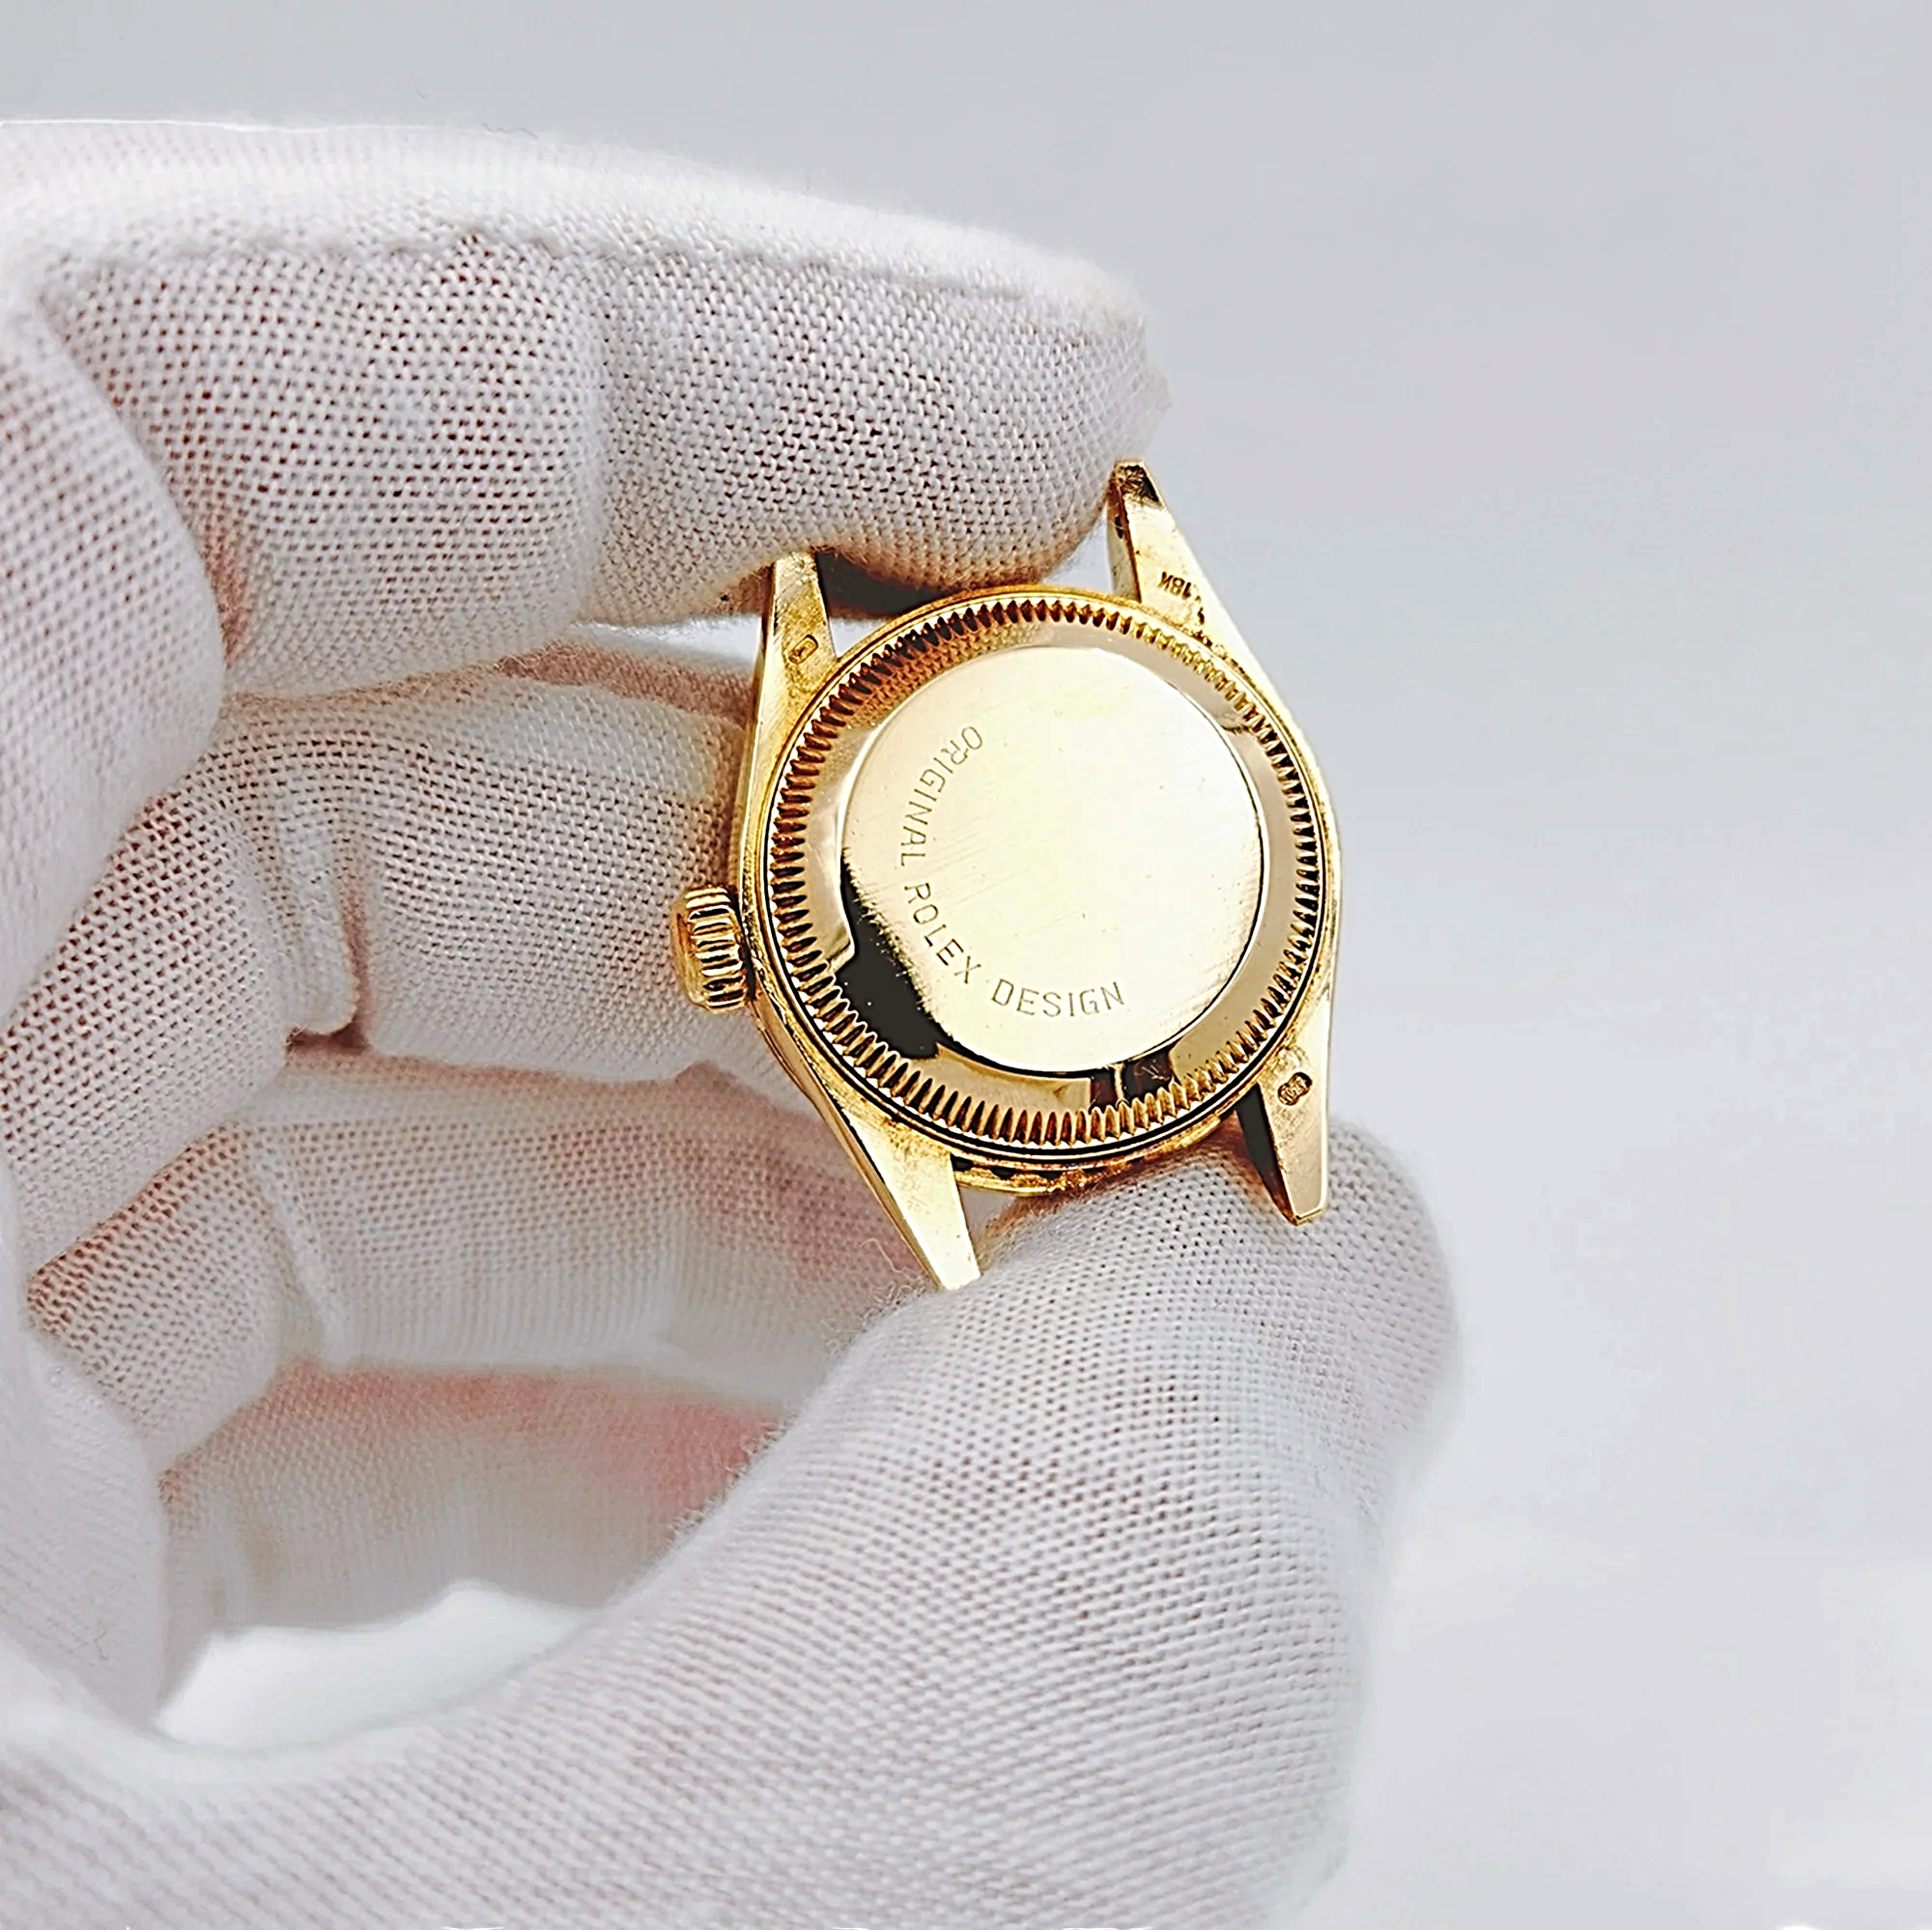 Ladies Rolex 26mm Presidential 18K Solid Yellow Gold Watch with Mother of Pearl Diamond Dial and Diamond Bezel. (Pre-Owned 69178)